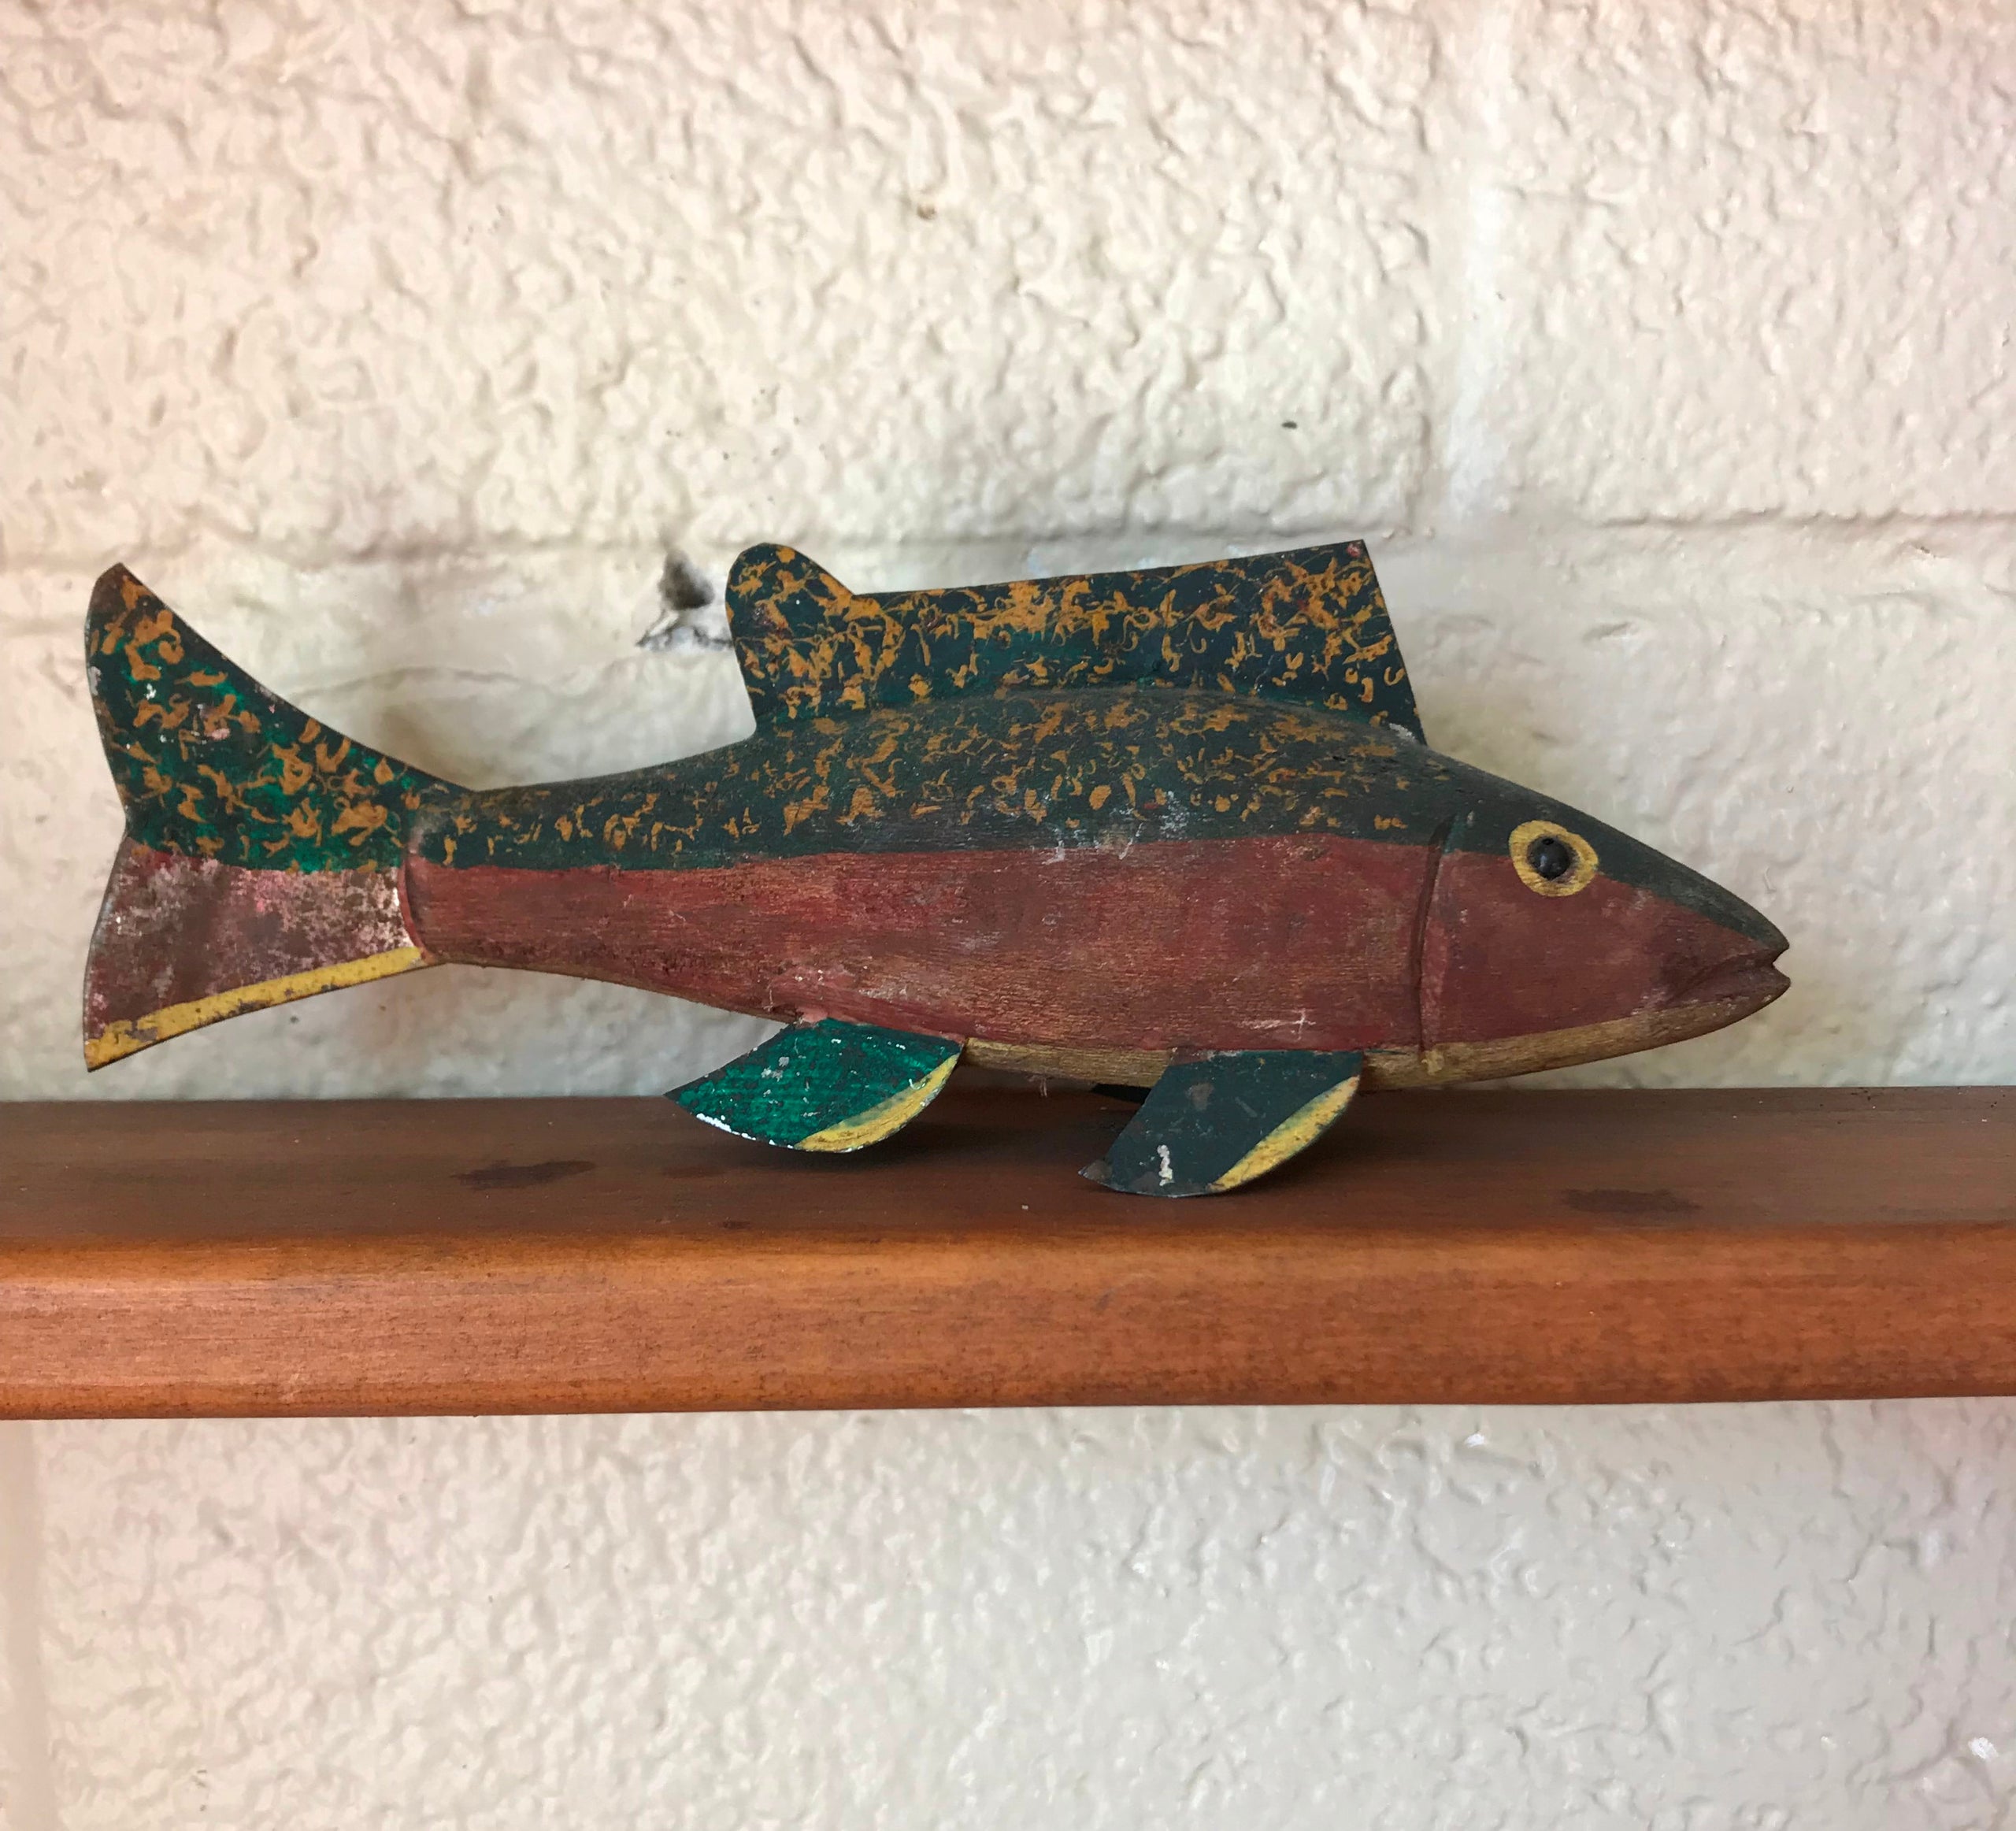 Hooked On Wood: The Allure of the Fish Decoy - Museum for Art in Wood